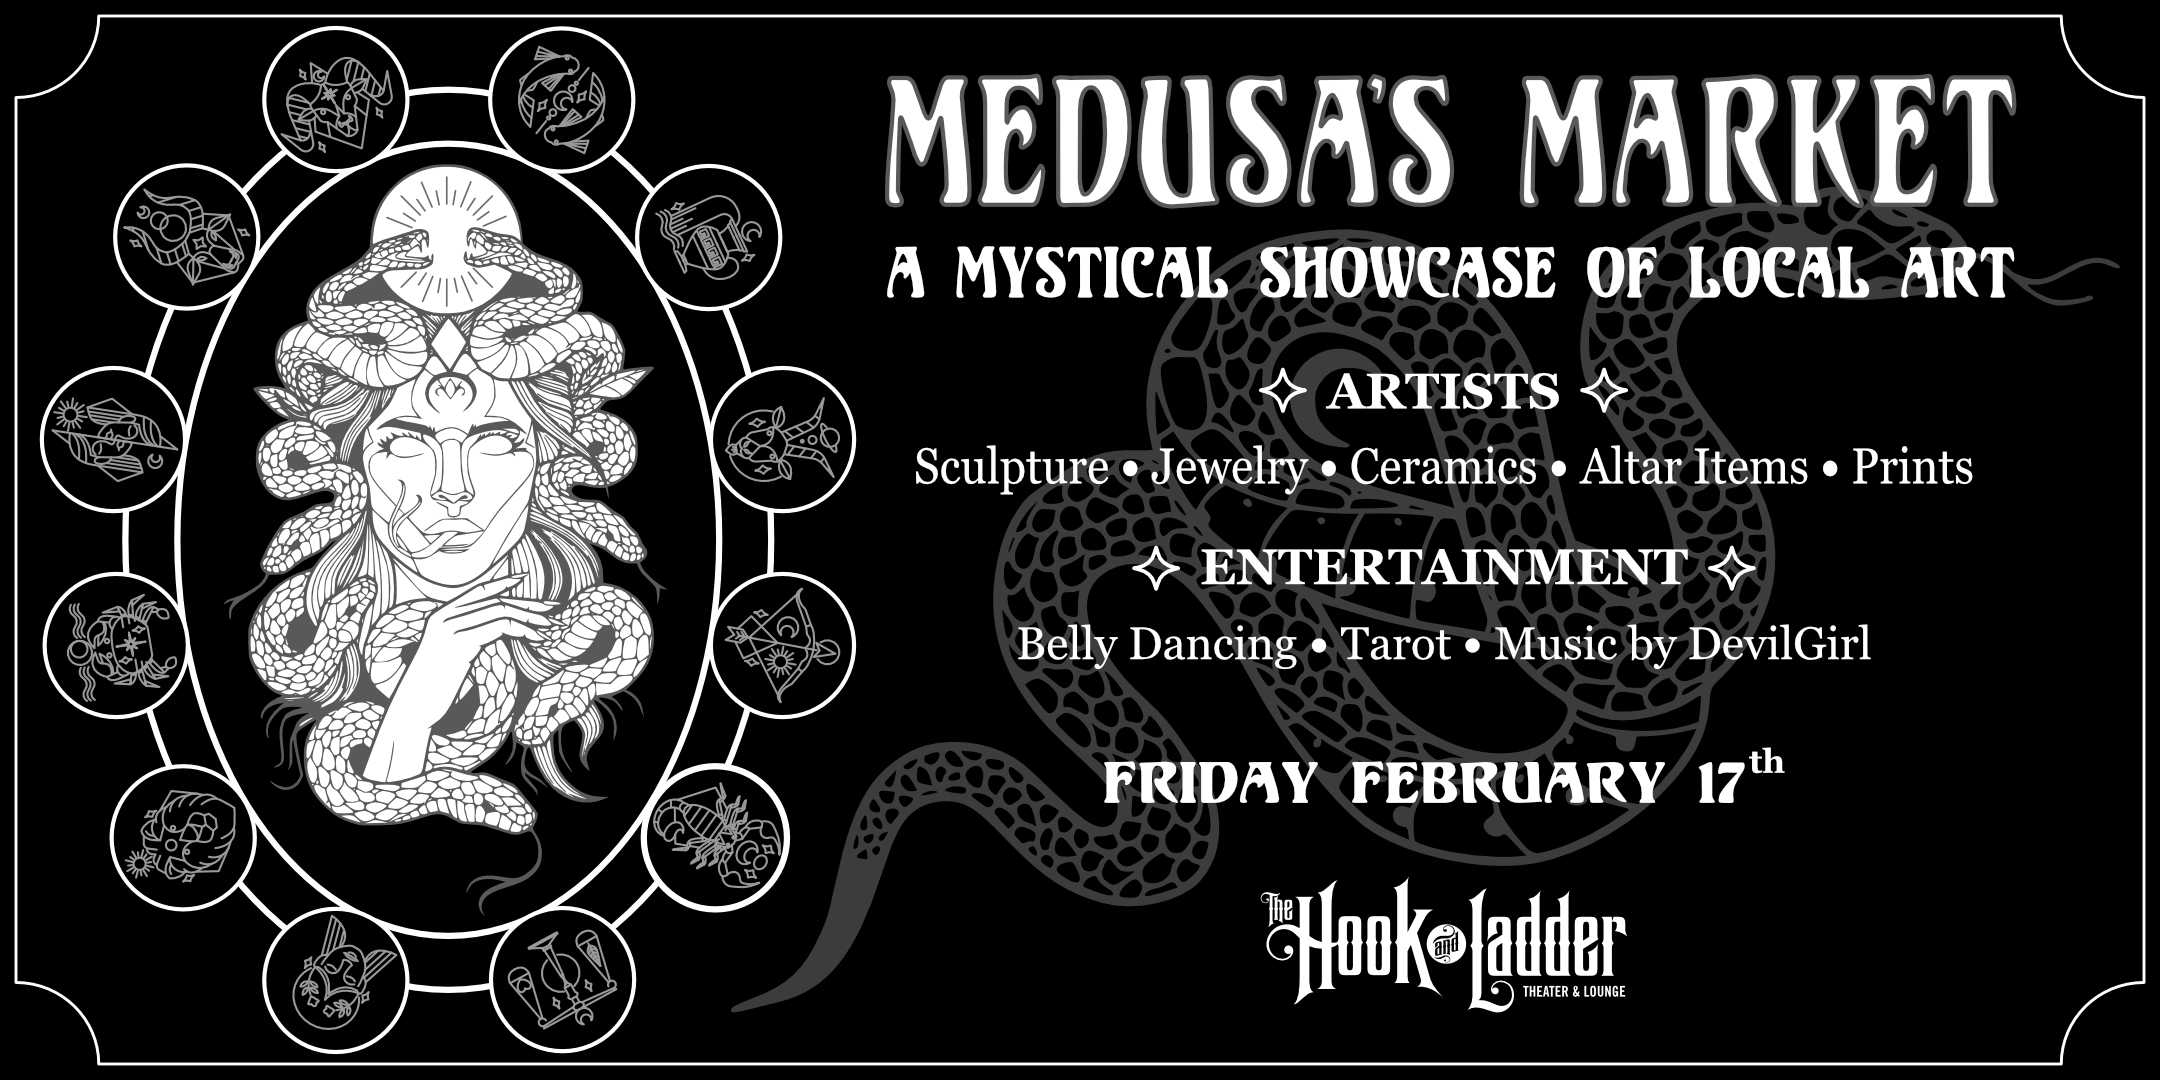 Medusa’s Market Friday, February 17, 2023 Mission Room at The Hook and Ladder Theater Doors 6pm-10pm :: FREE